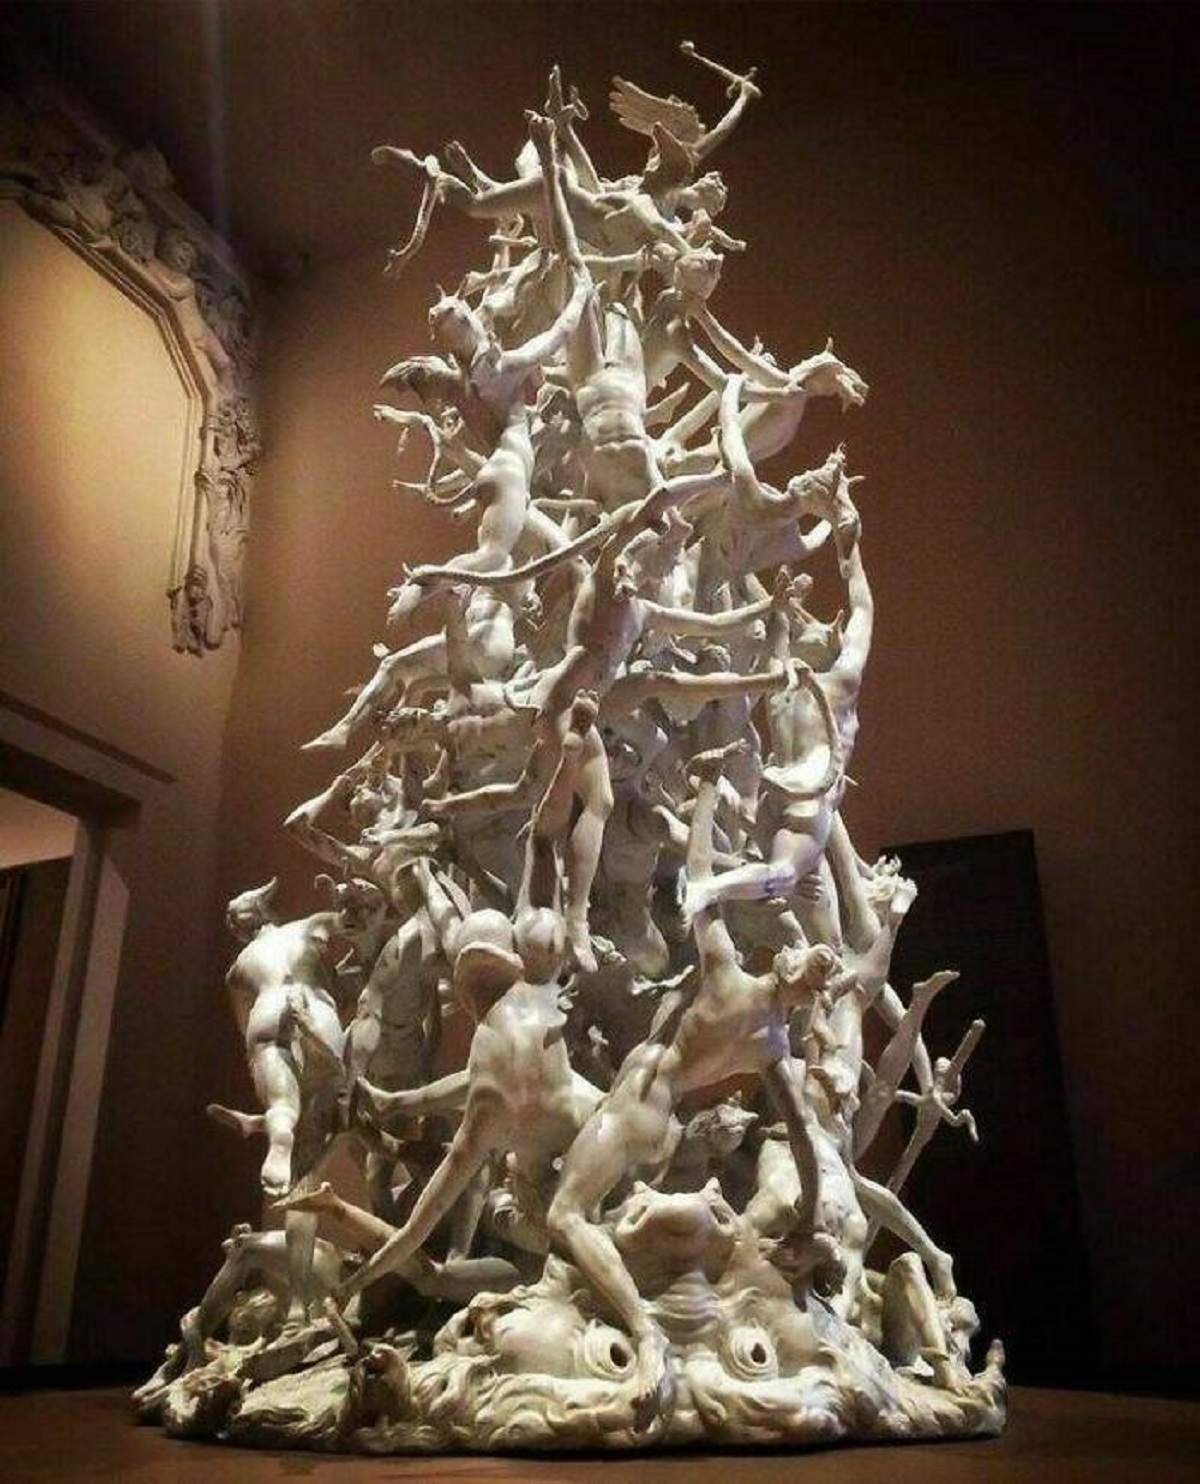 "Fall Of The Rebel Angels, Carved Out Of A Single Piece Of Marble In 1740 By Italian Sculptor Agostino Fasolato, It Depicts 60 Fallen Angels"